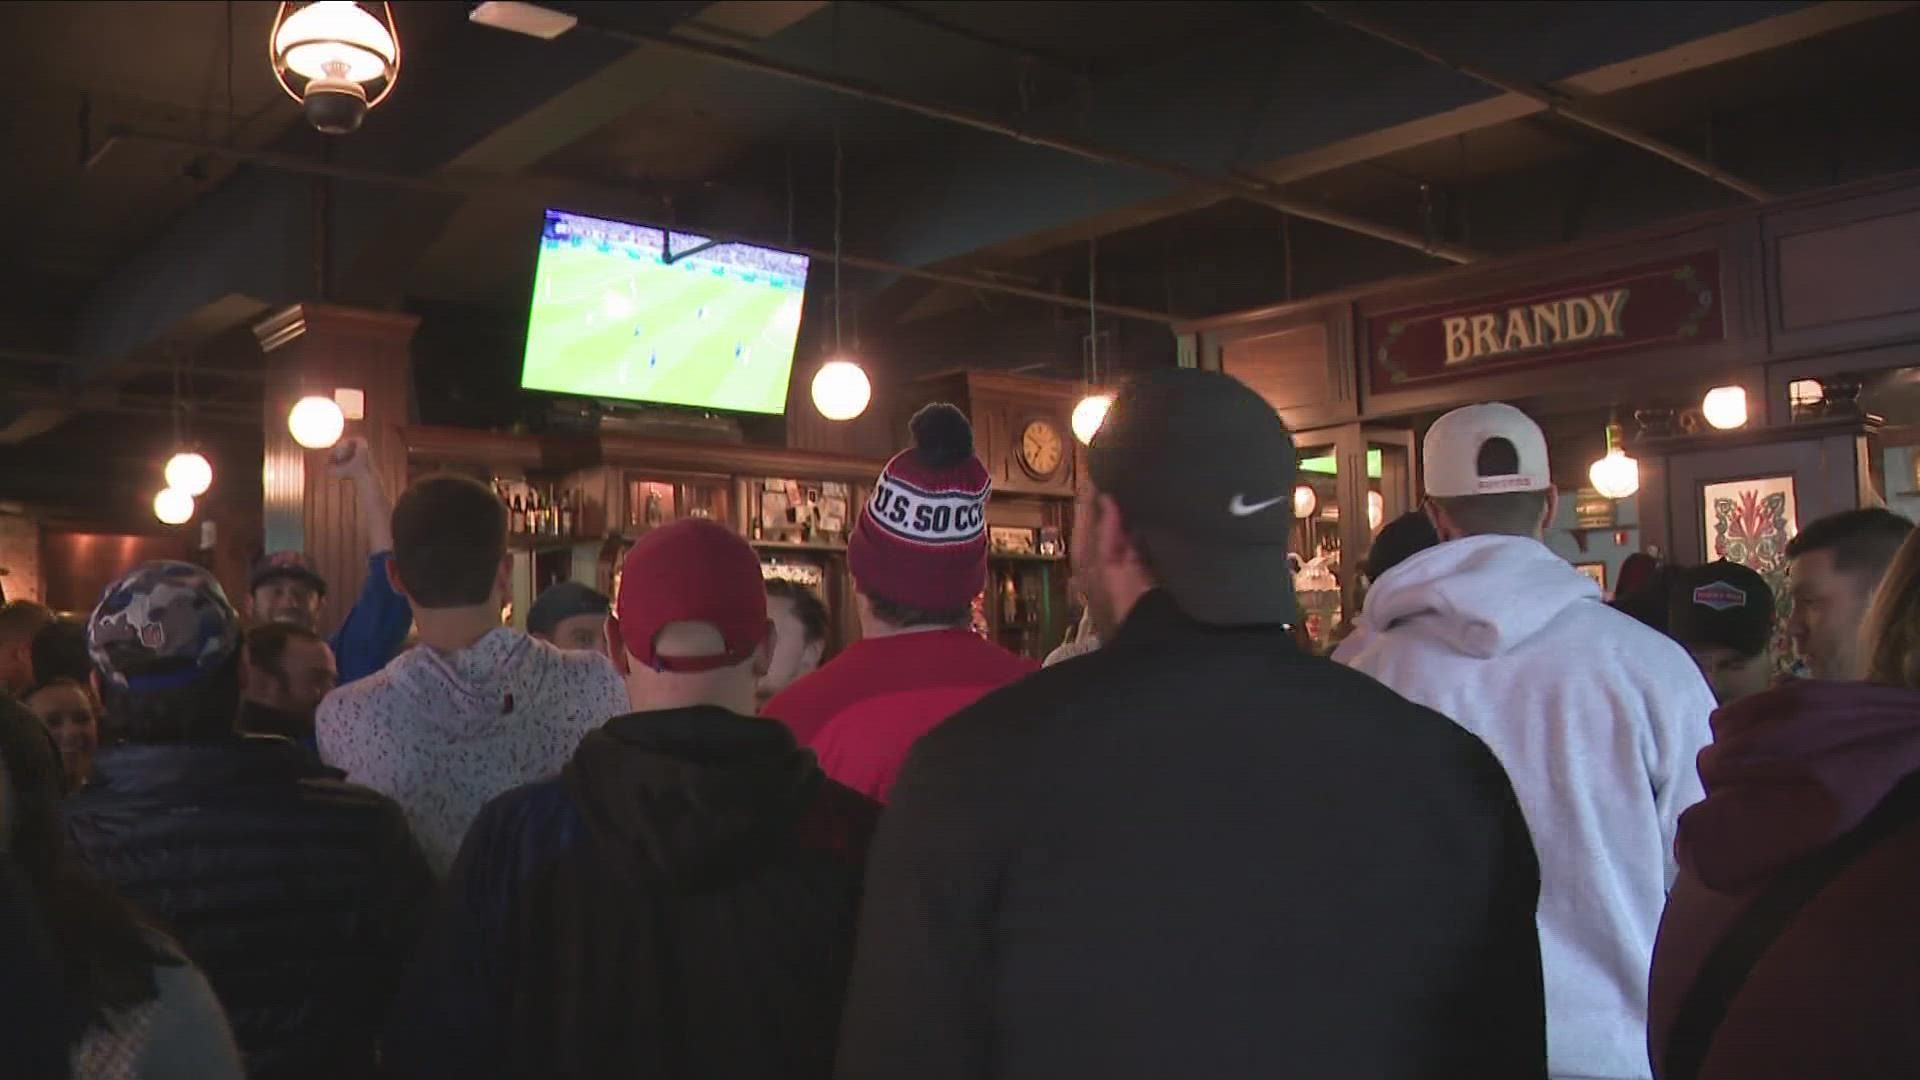 We stopped by a watch party at The Banshee in downtown Buffalo. Fans we spoke with said it's just more fun to come out and watch big games with other fans.